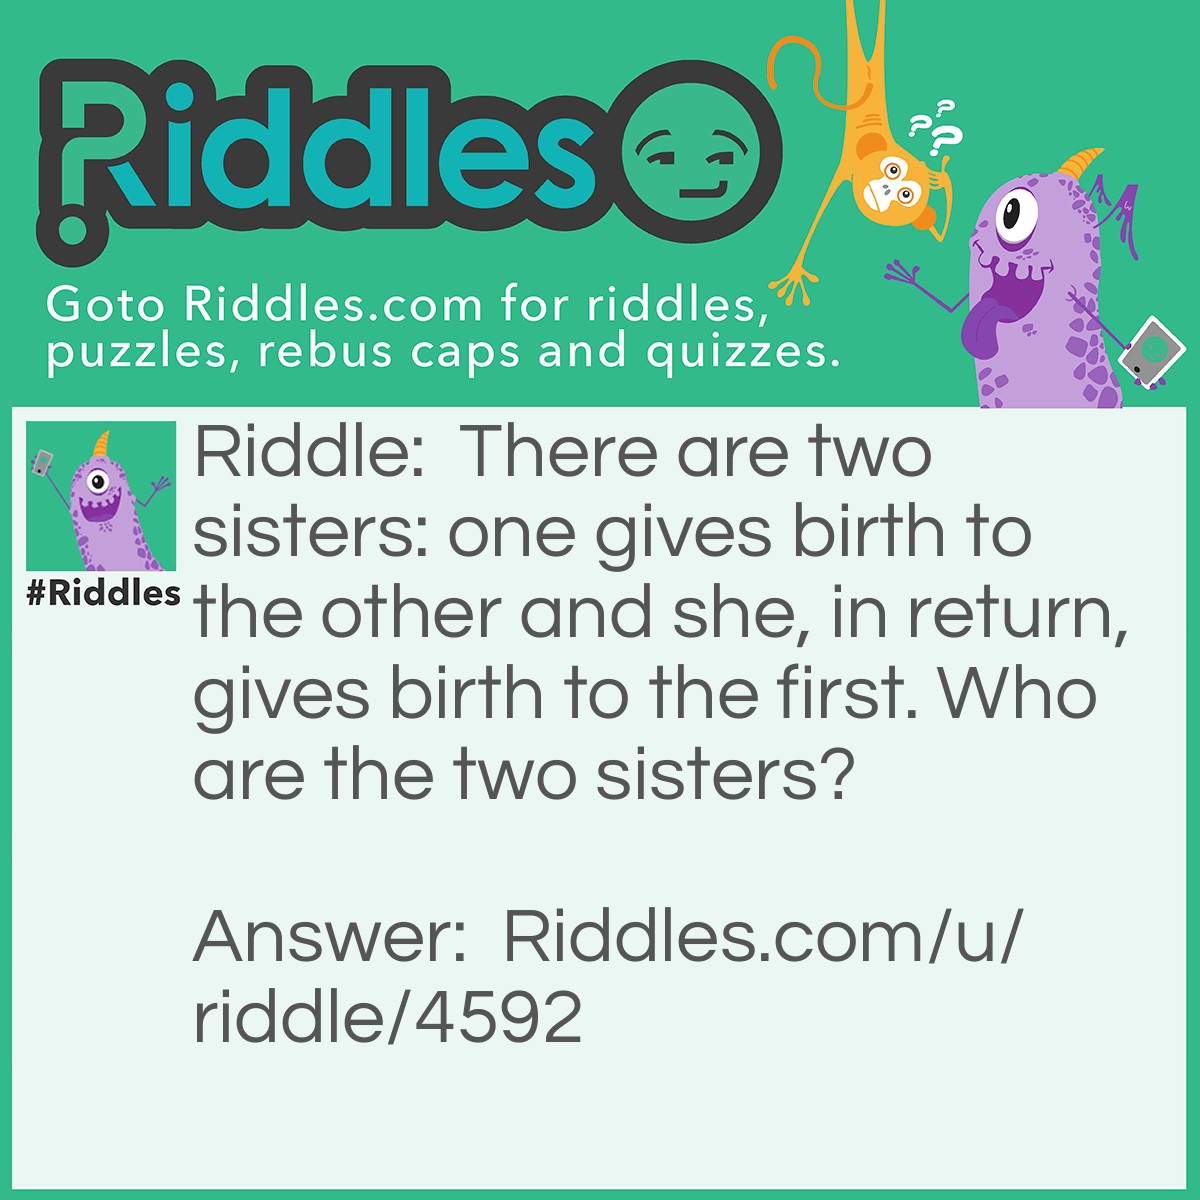 Riddle: There are two sisters: one gives birth to the other and she, in return, gives birth to the first. Who are the two sisters? Answer: Day and Night.